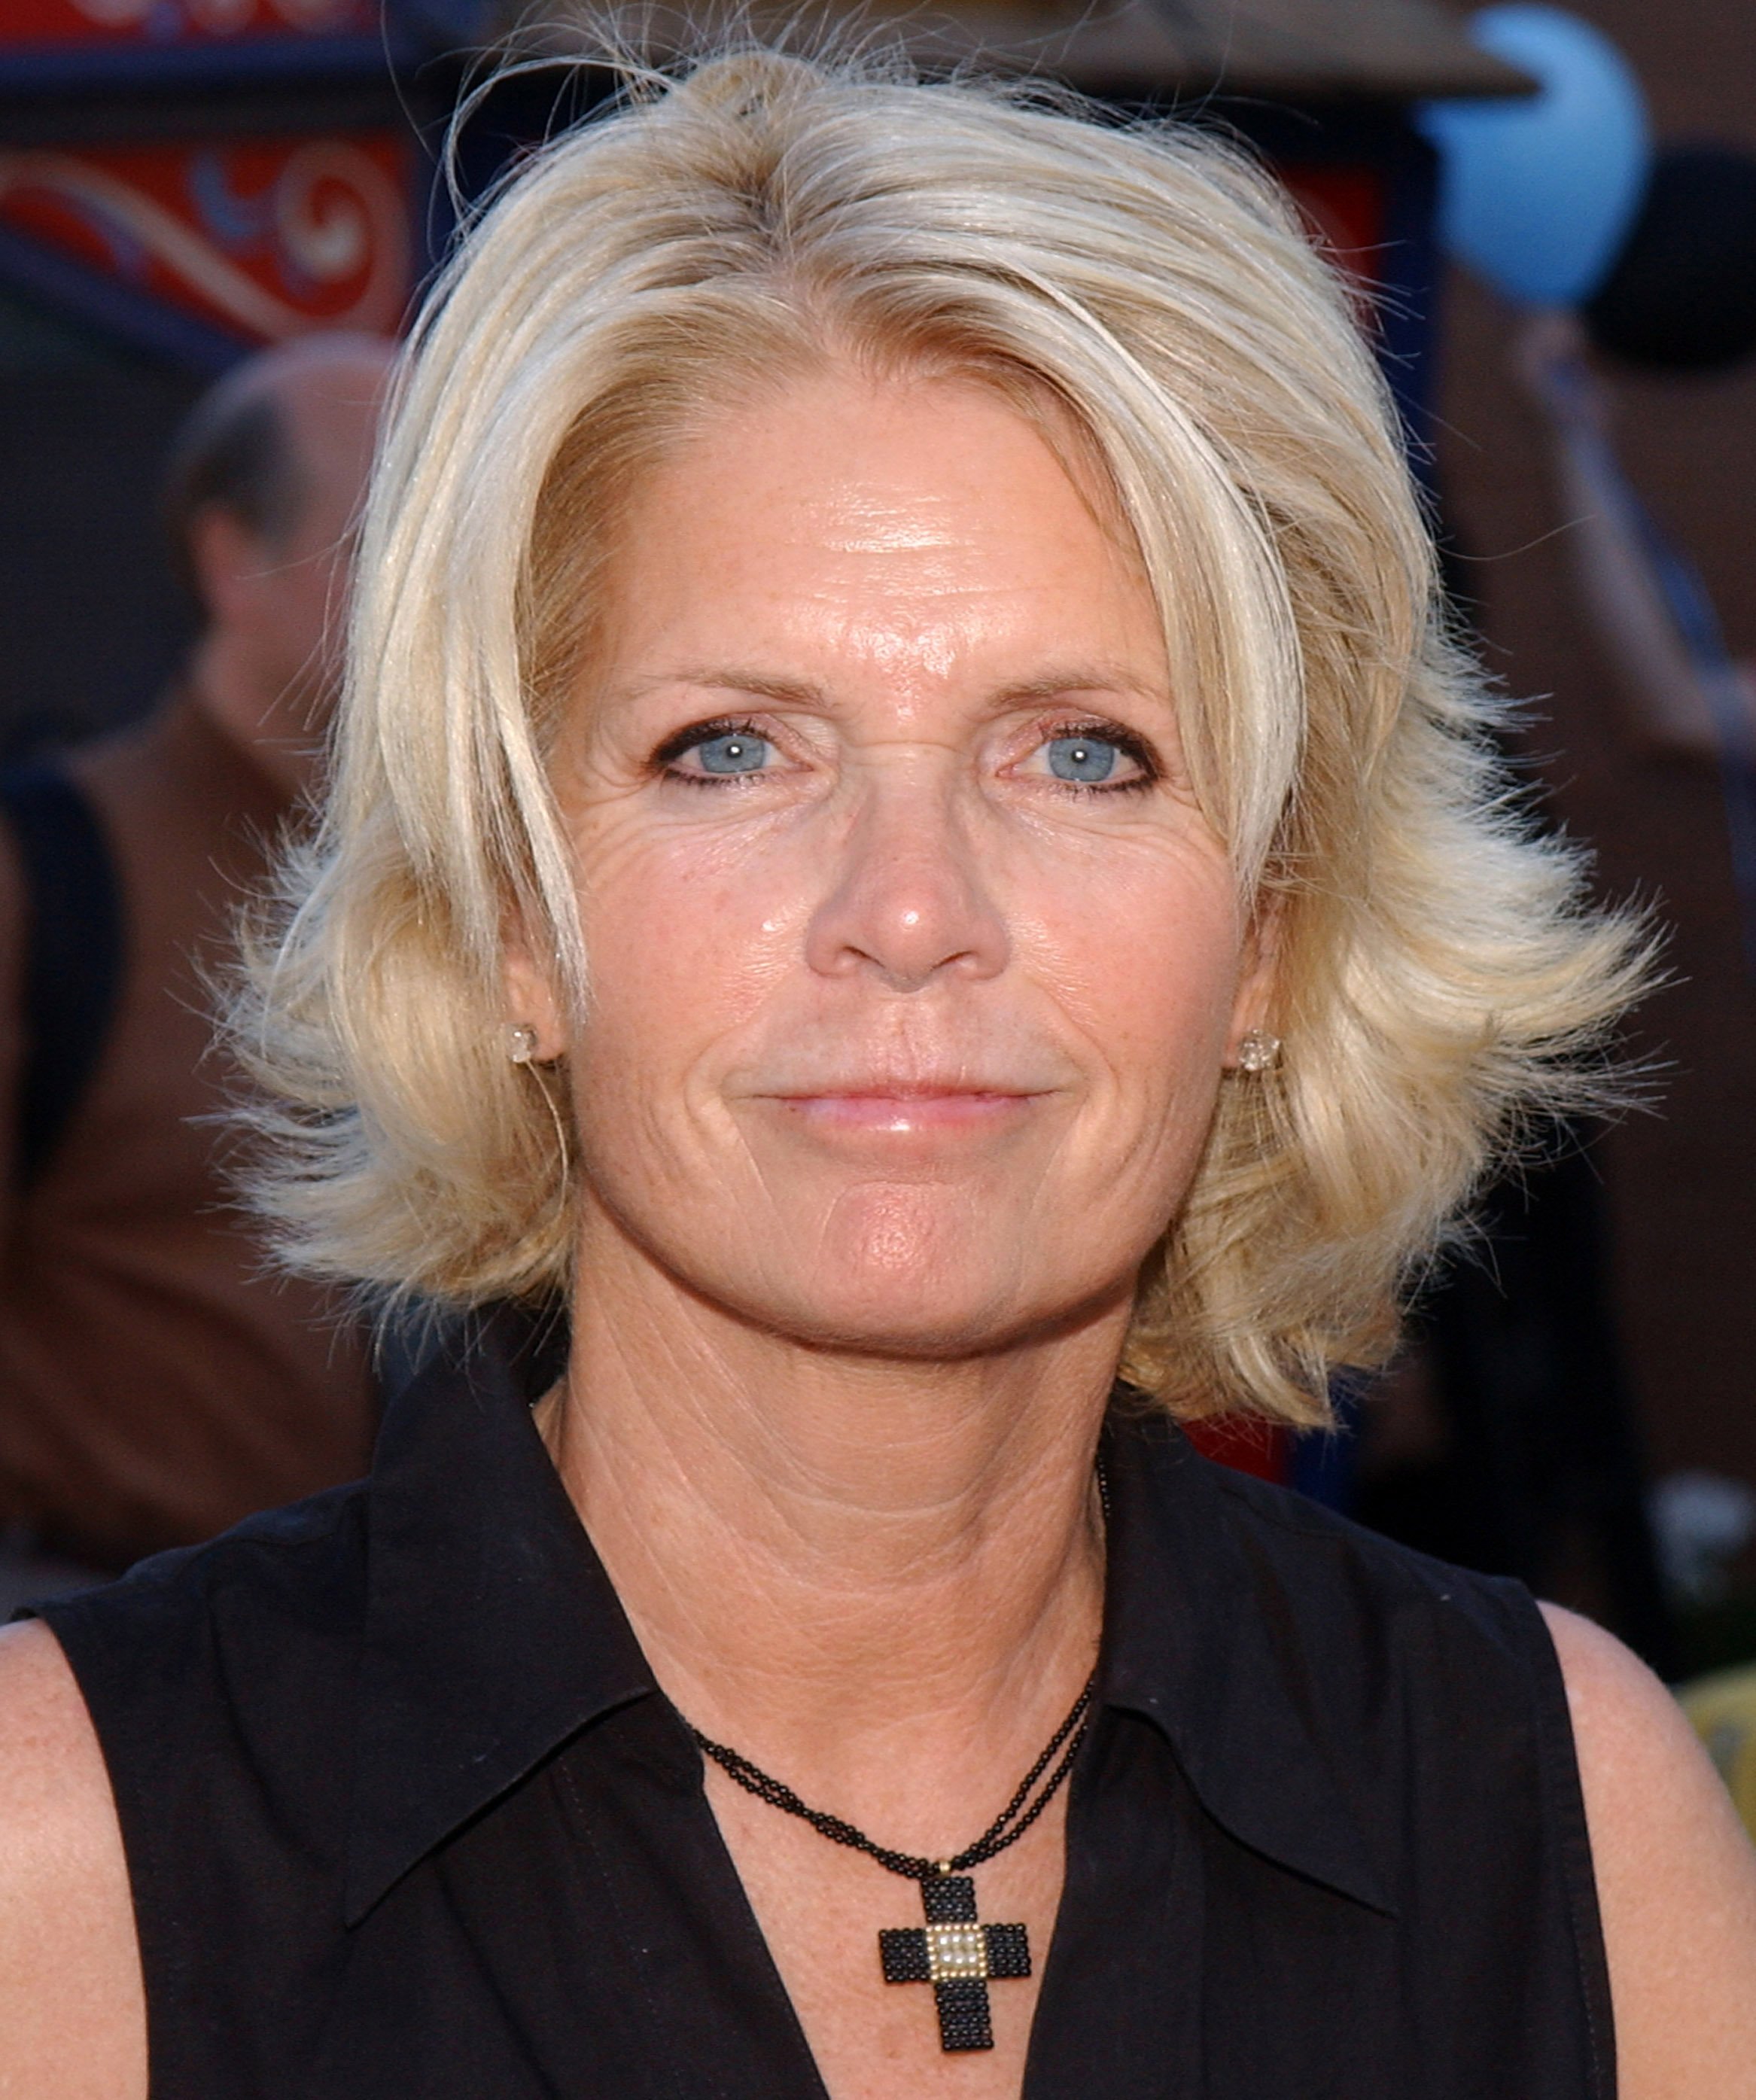 Meredith Baxter at "WeSparkle Night - Take III" to Benefit weSpark Cancer Support Center, Los Angeles, California. | Photo: Getty Images